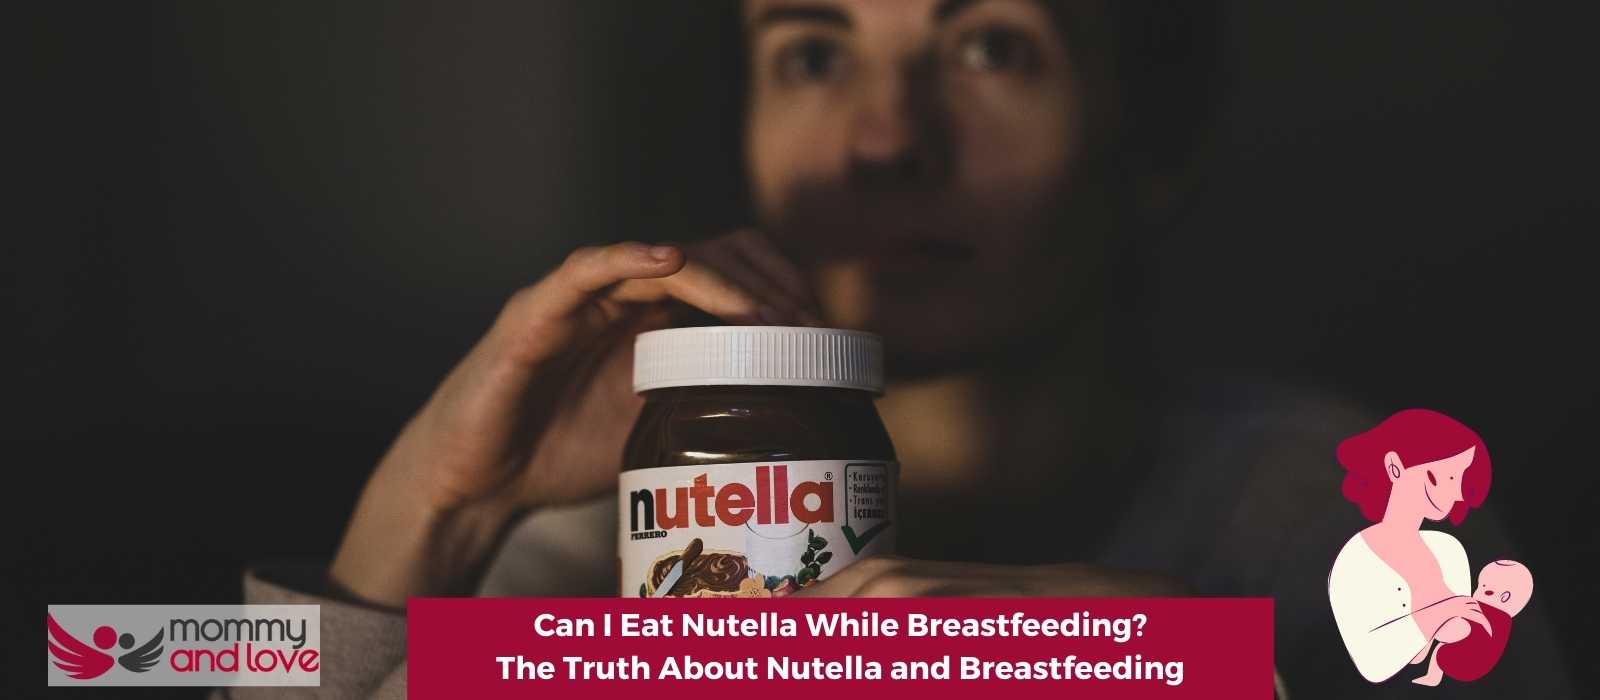 Can I Eat Nutella While Breastfeeding? The Truth About Nutella and Breastfeeding